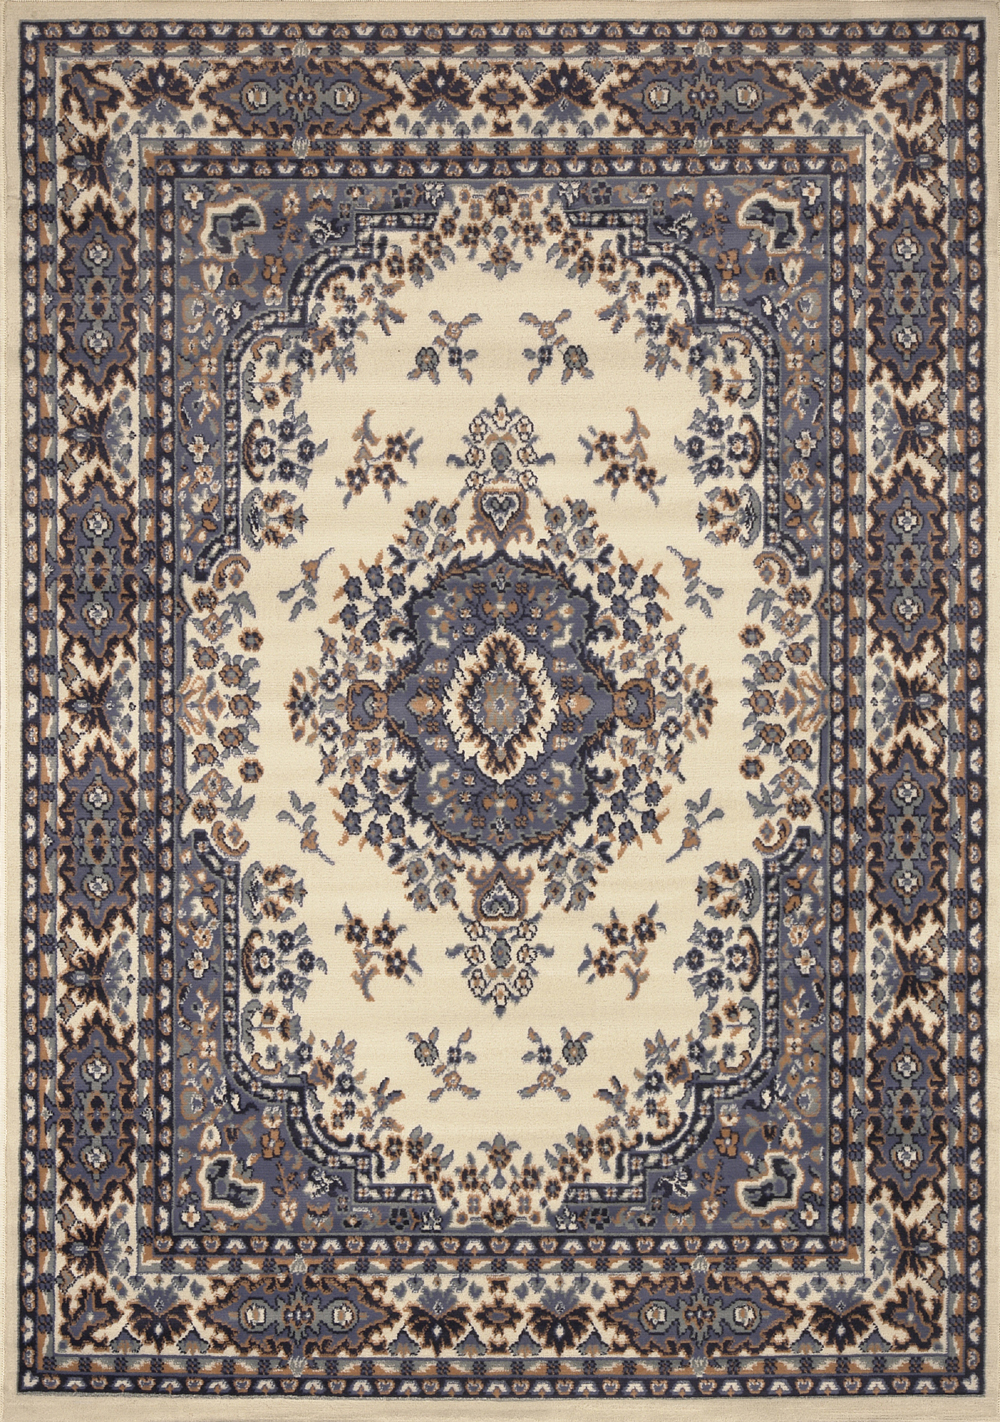 Persian area rugs large traditional 8x11 oriental area rug persian style carpet -approx  7u00278 SKOKYVX